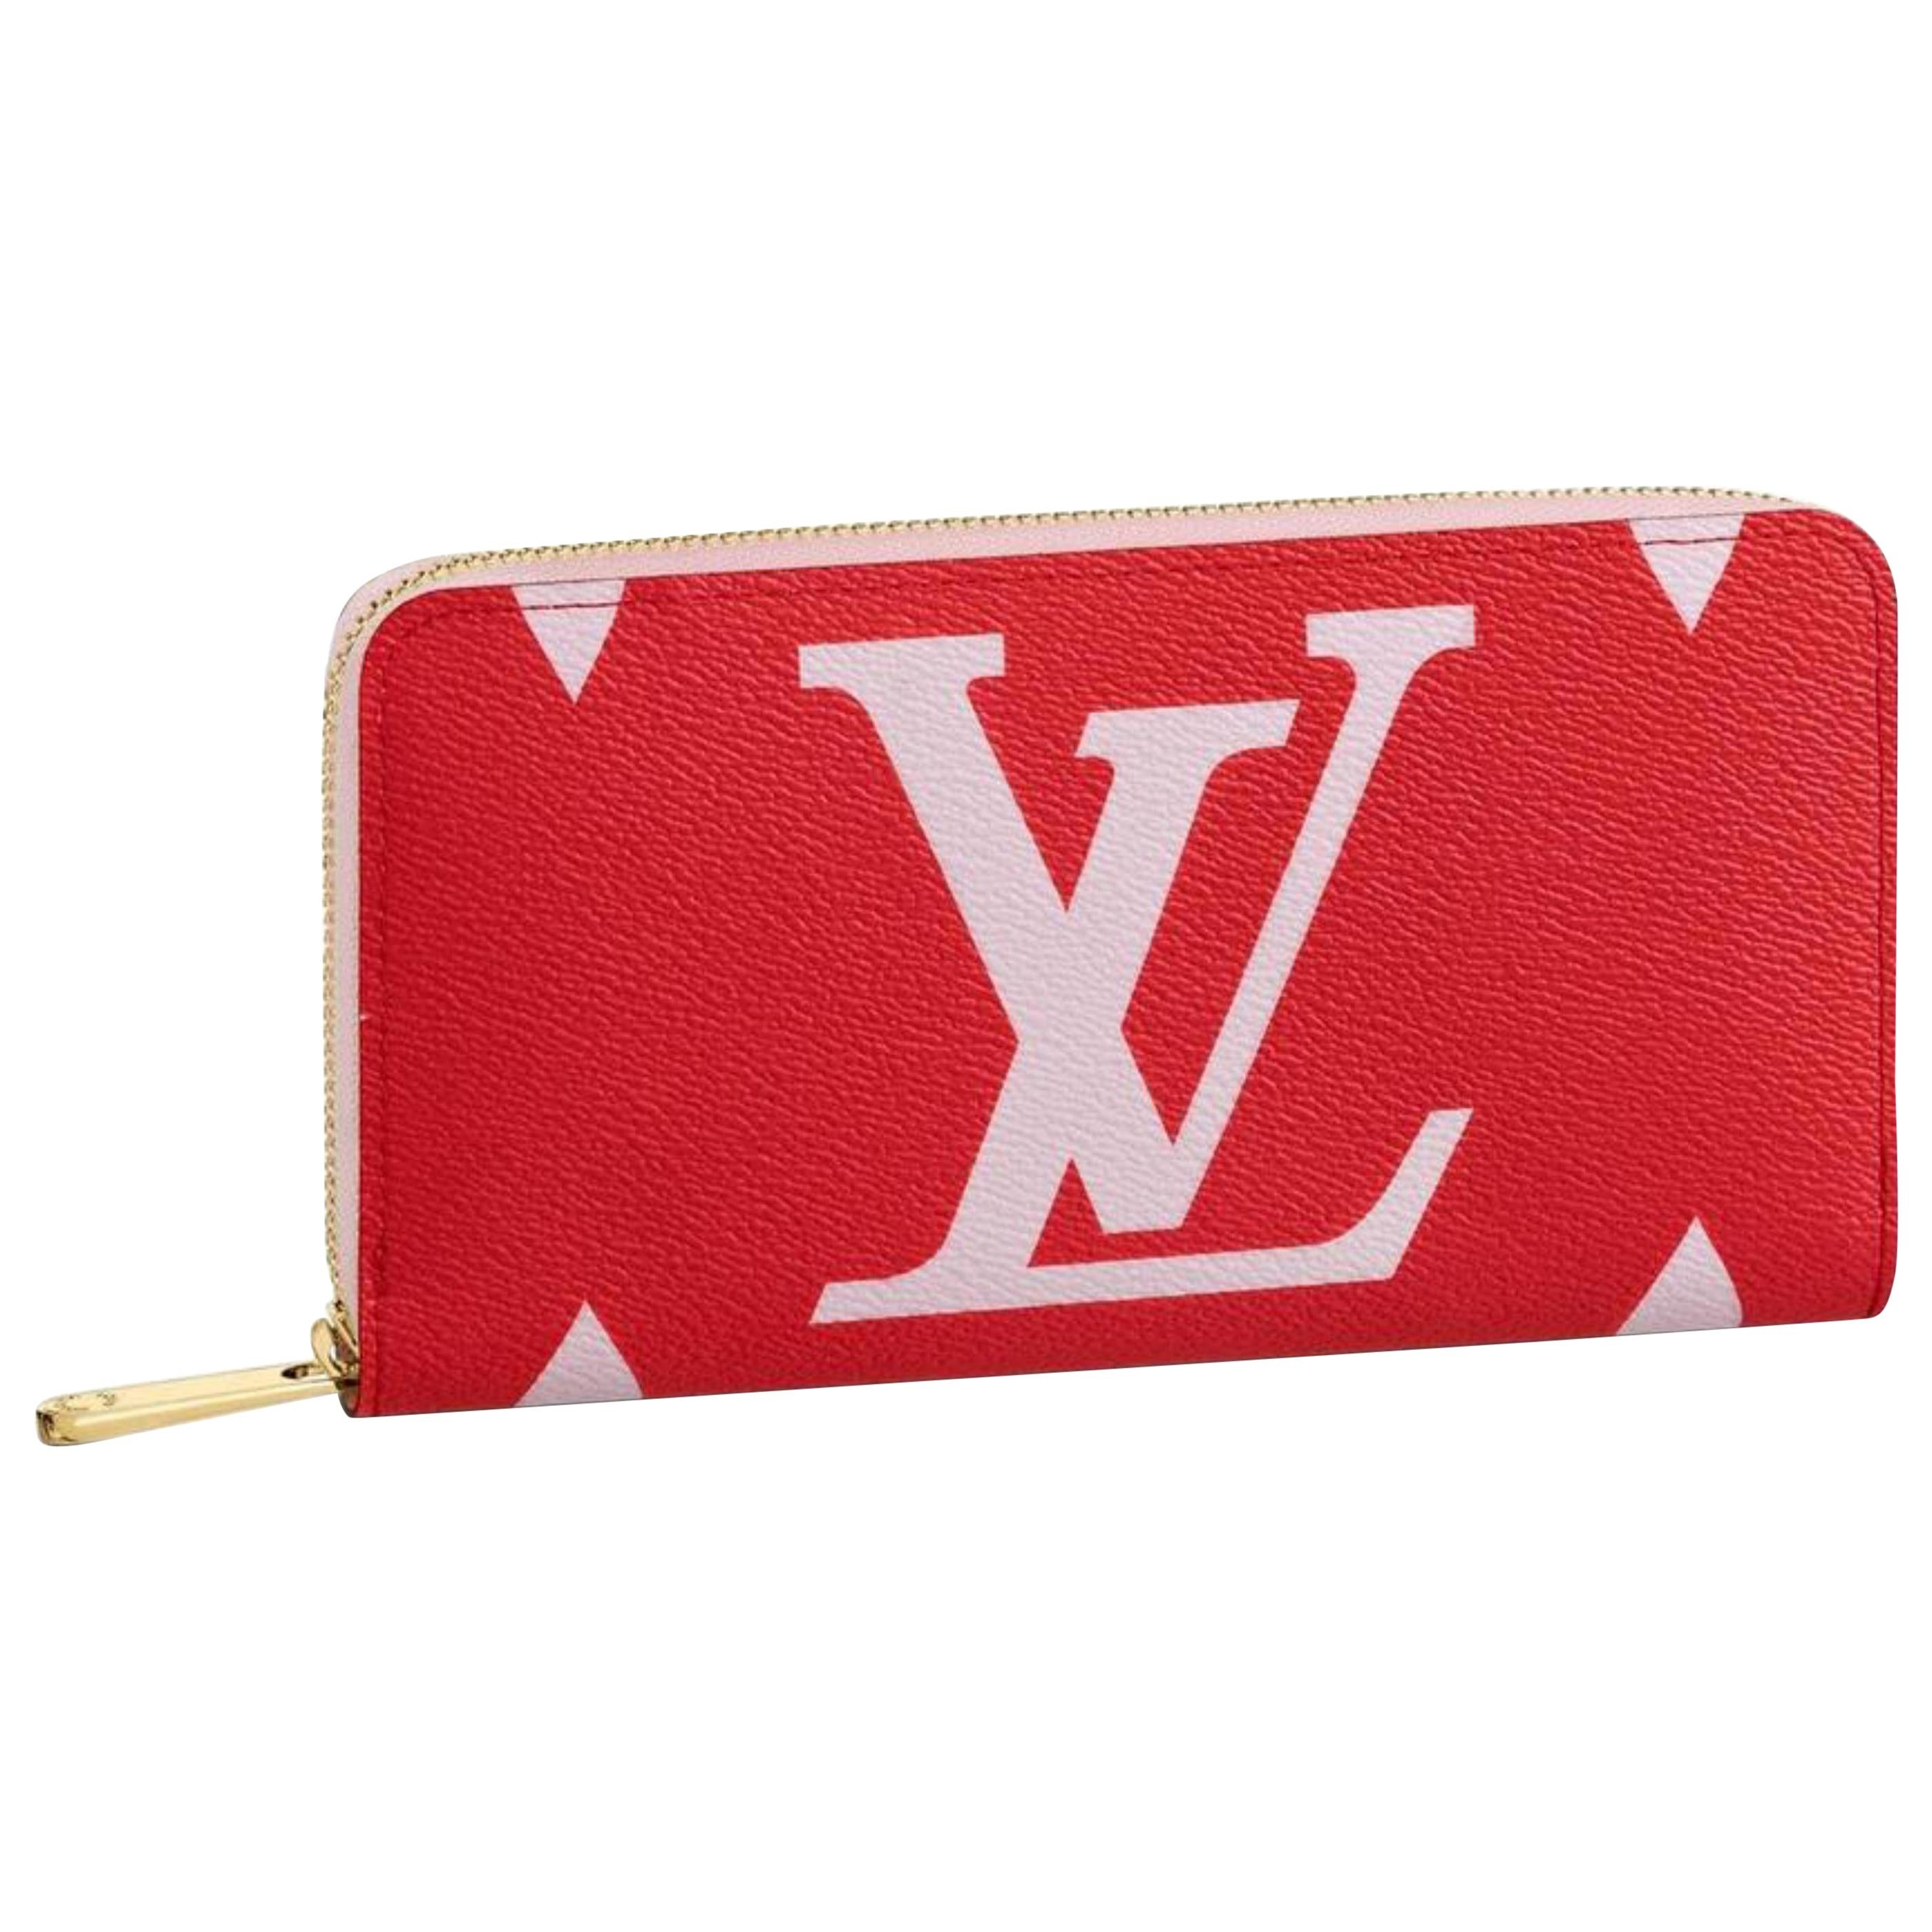 Louis Vuitton Red Zippy Limited Edition Runway Pink Giant Monogram 870624 Wallet For Sale